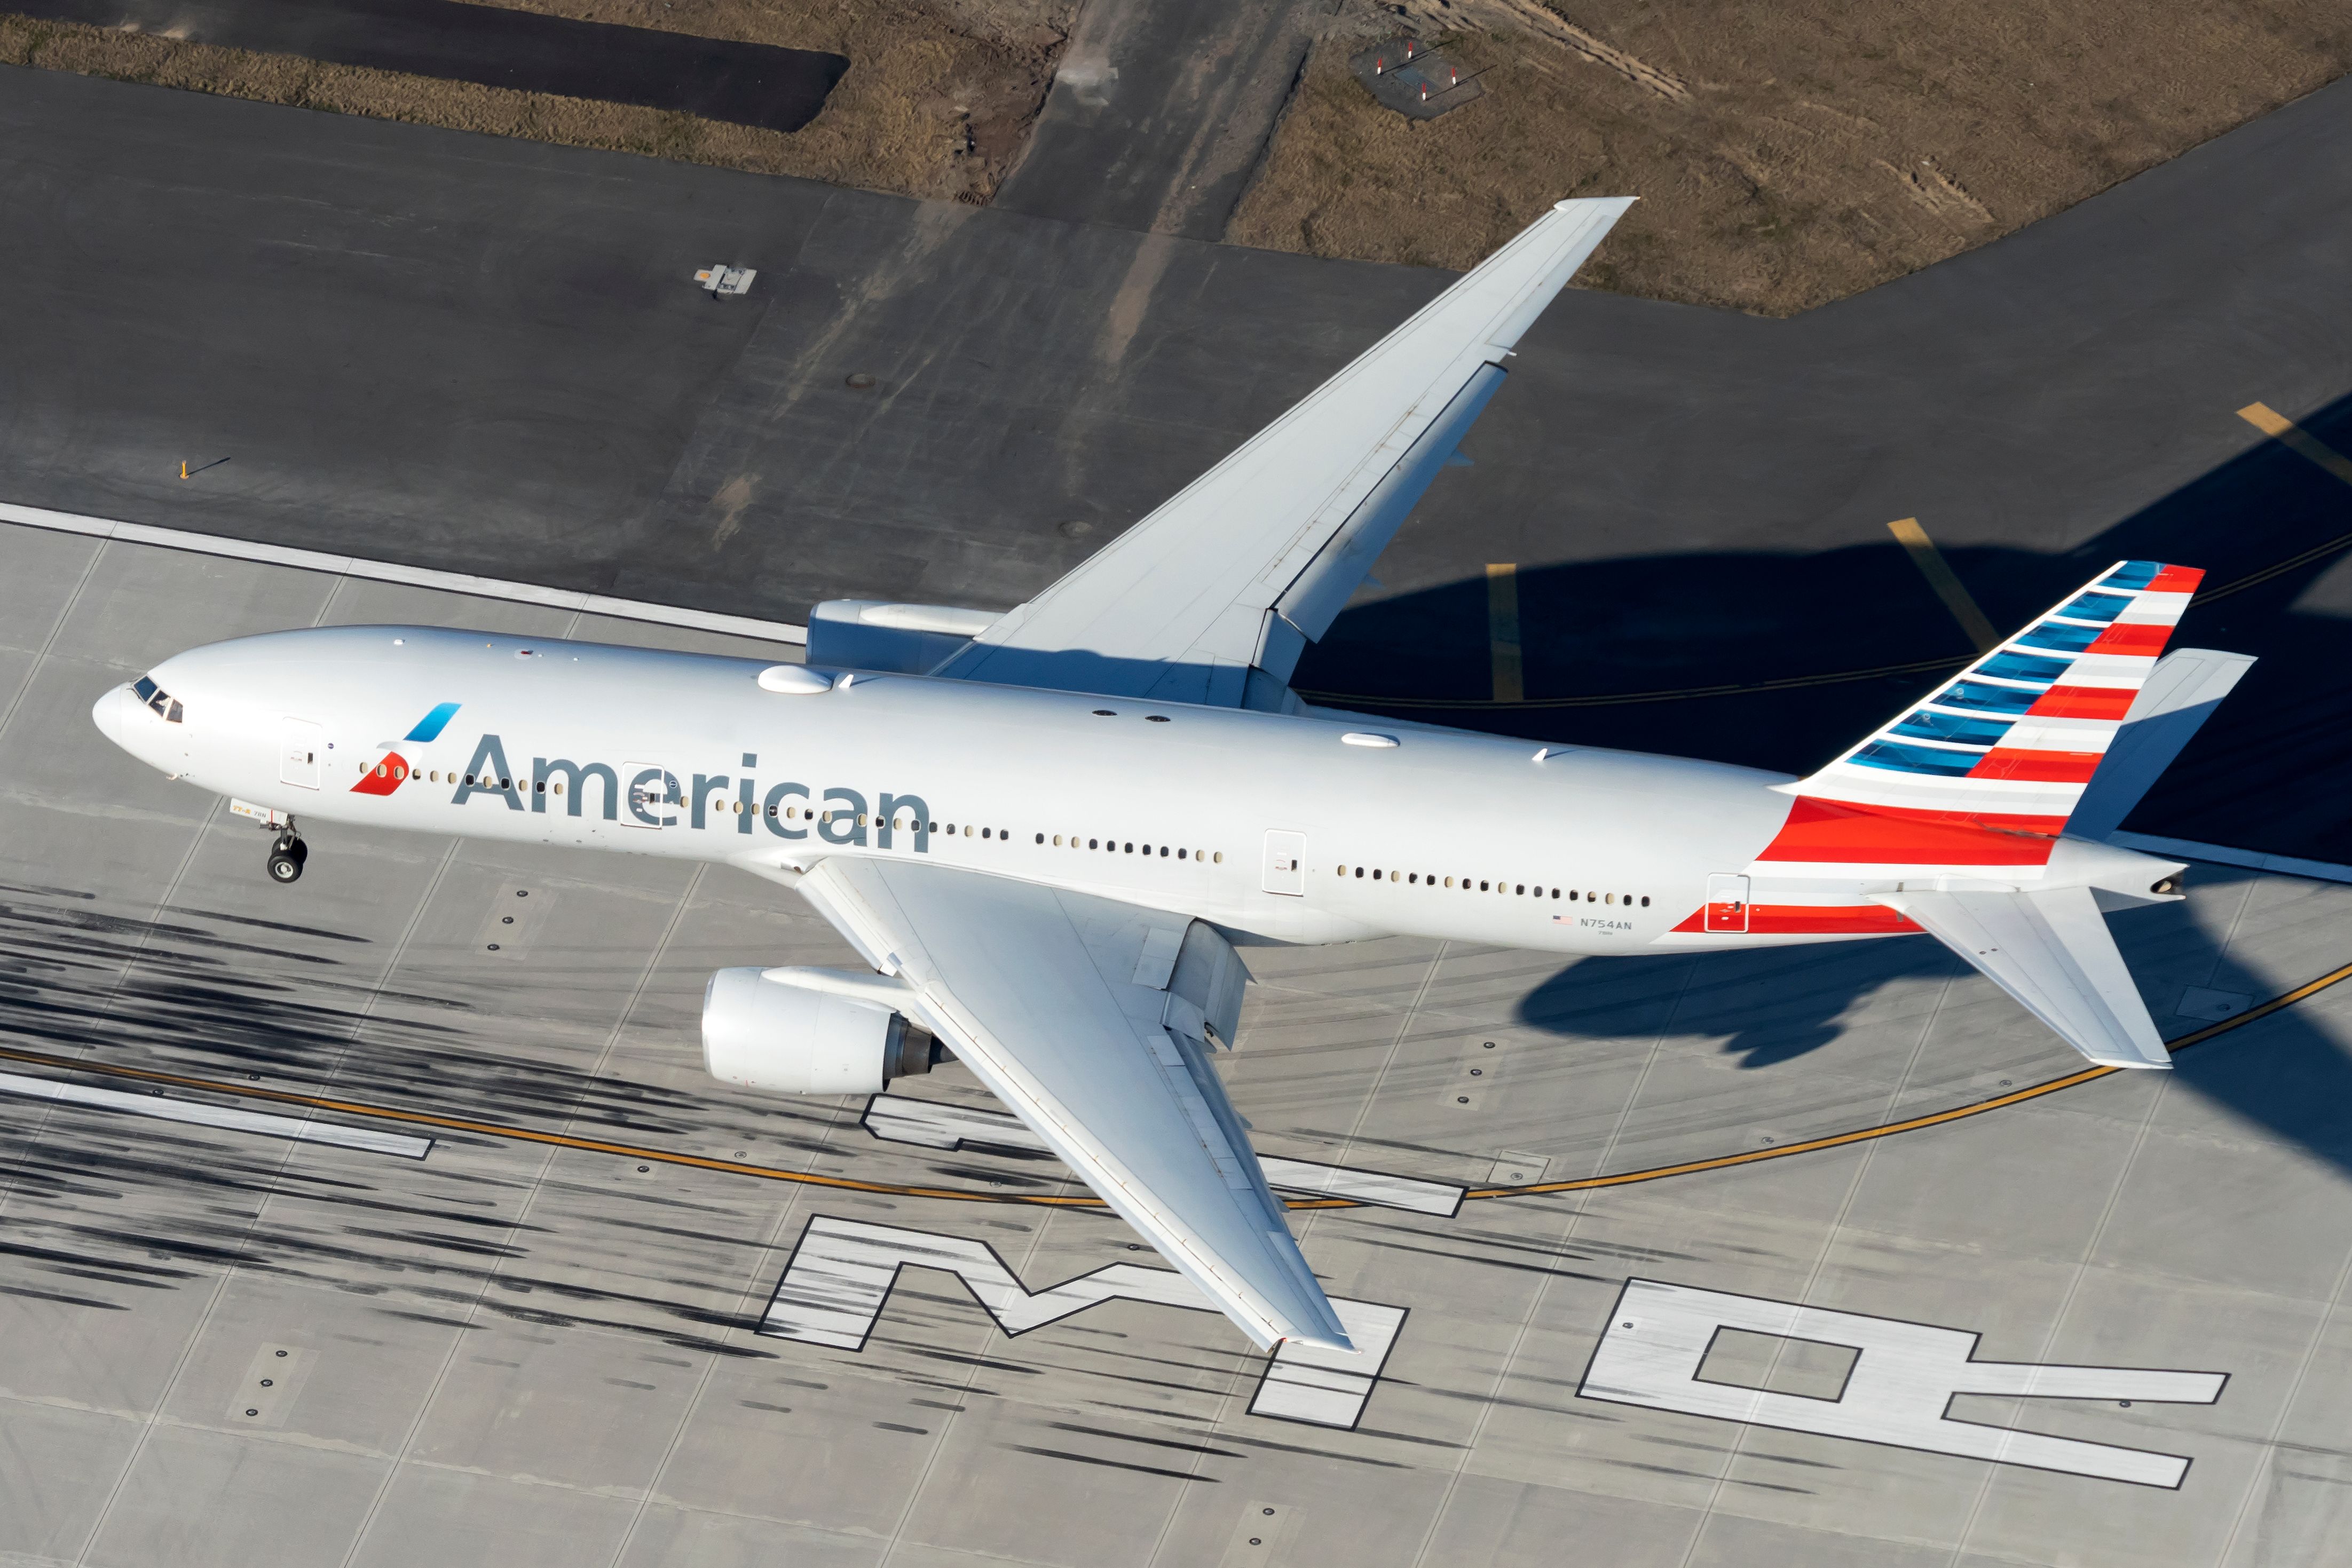 An American Airlines Boeing 777-200 about to land on a runway.